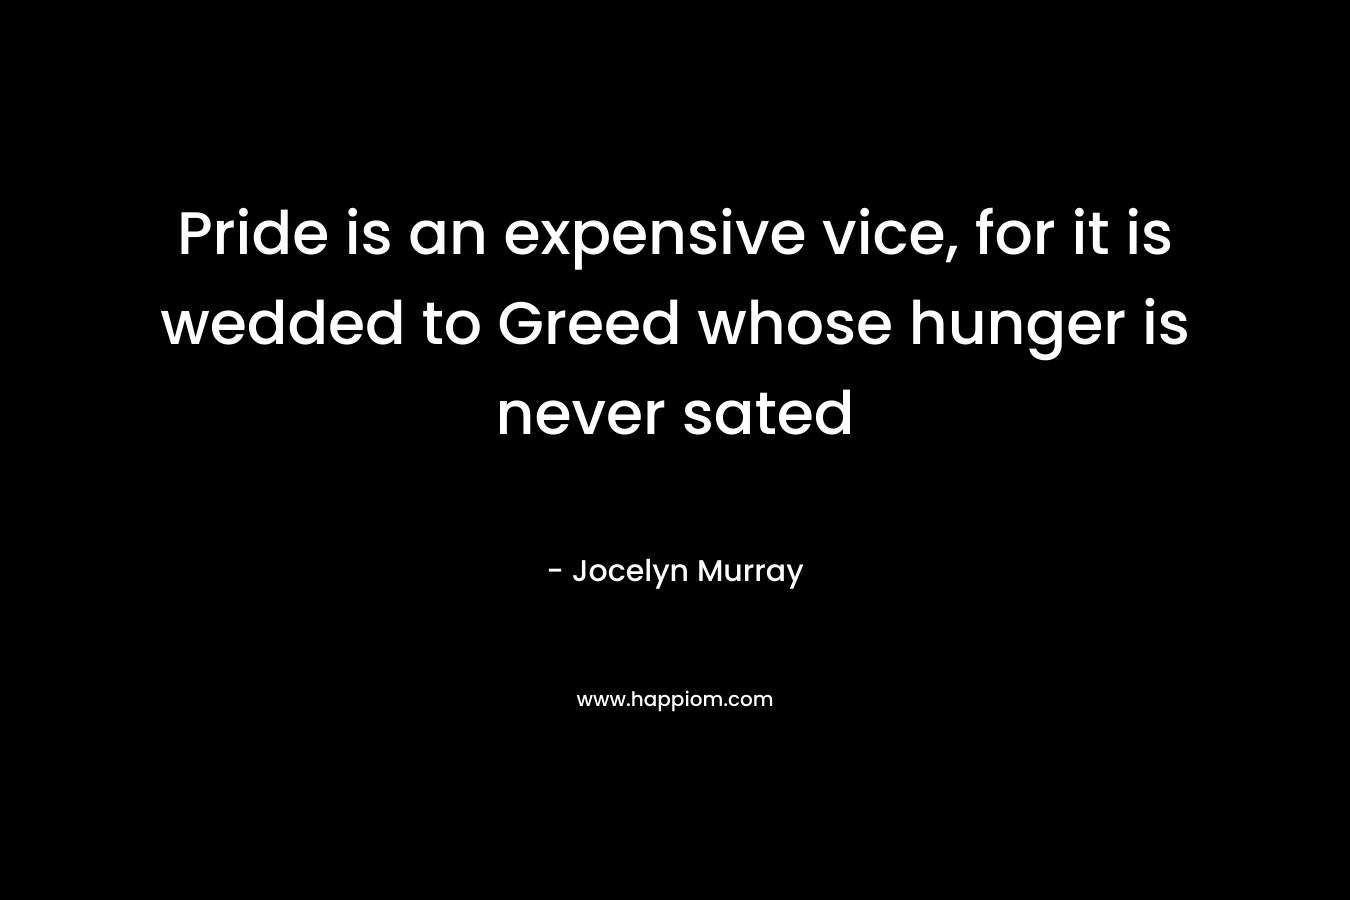 Pride is an expensive vice, for it is wedded to Greed whose hunger is never sated